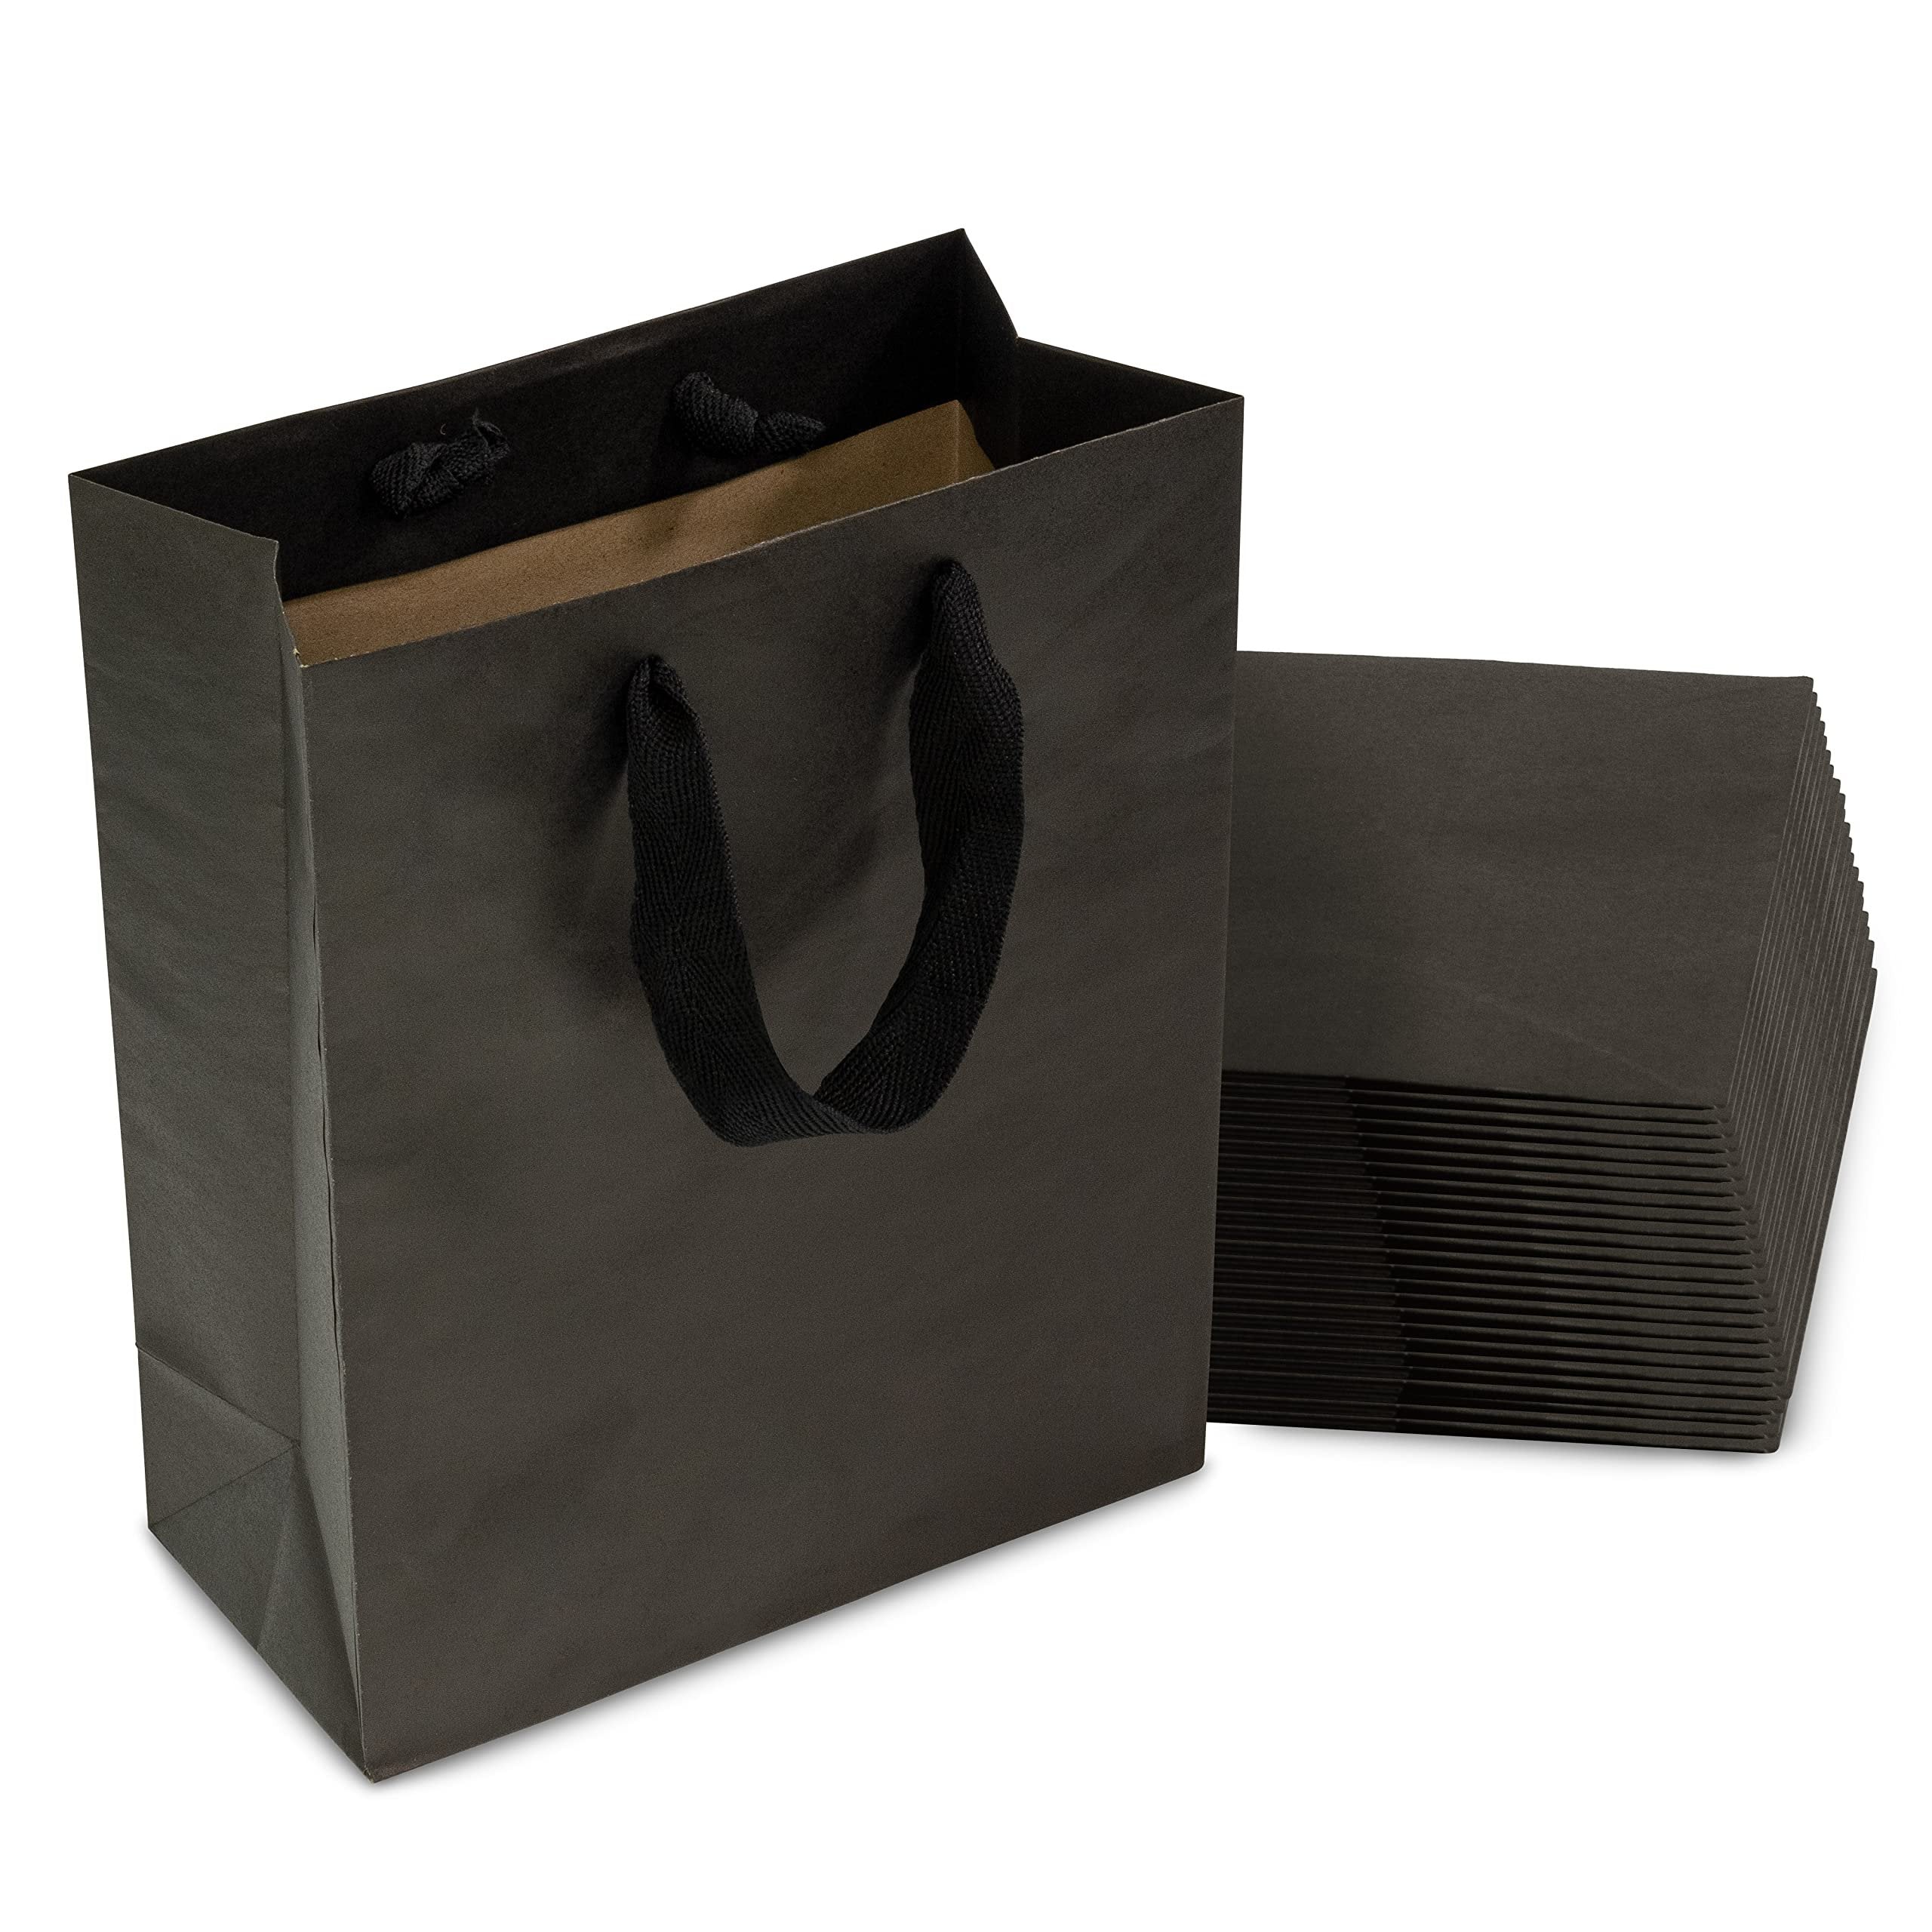 Black Gift Bags with Handles - 8x4x10 Inch 25 Pack Designer Shopping Bags in Bulk, Small Gift Wrap Euro Totes with Fabric Ribbon Handles for Boutiques, Small Business, Retail Stores, Merchandise